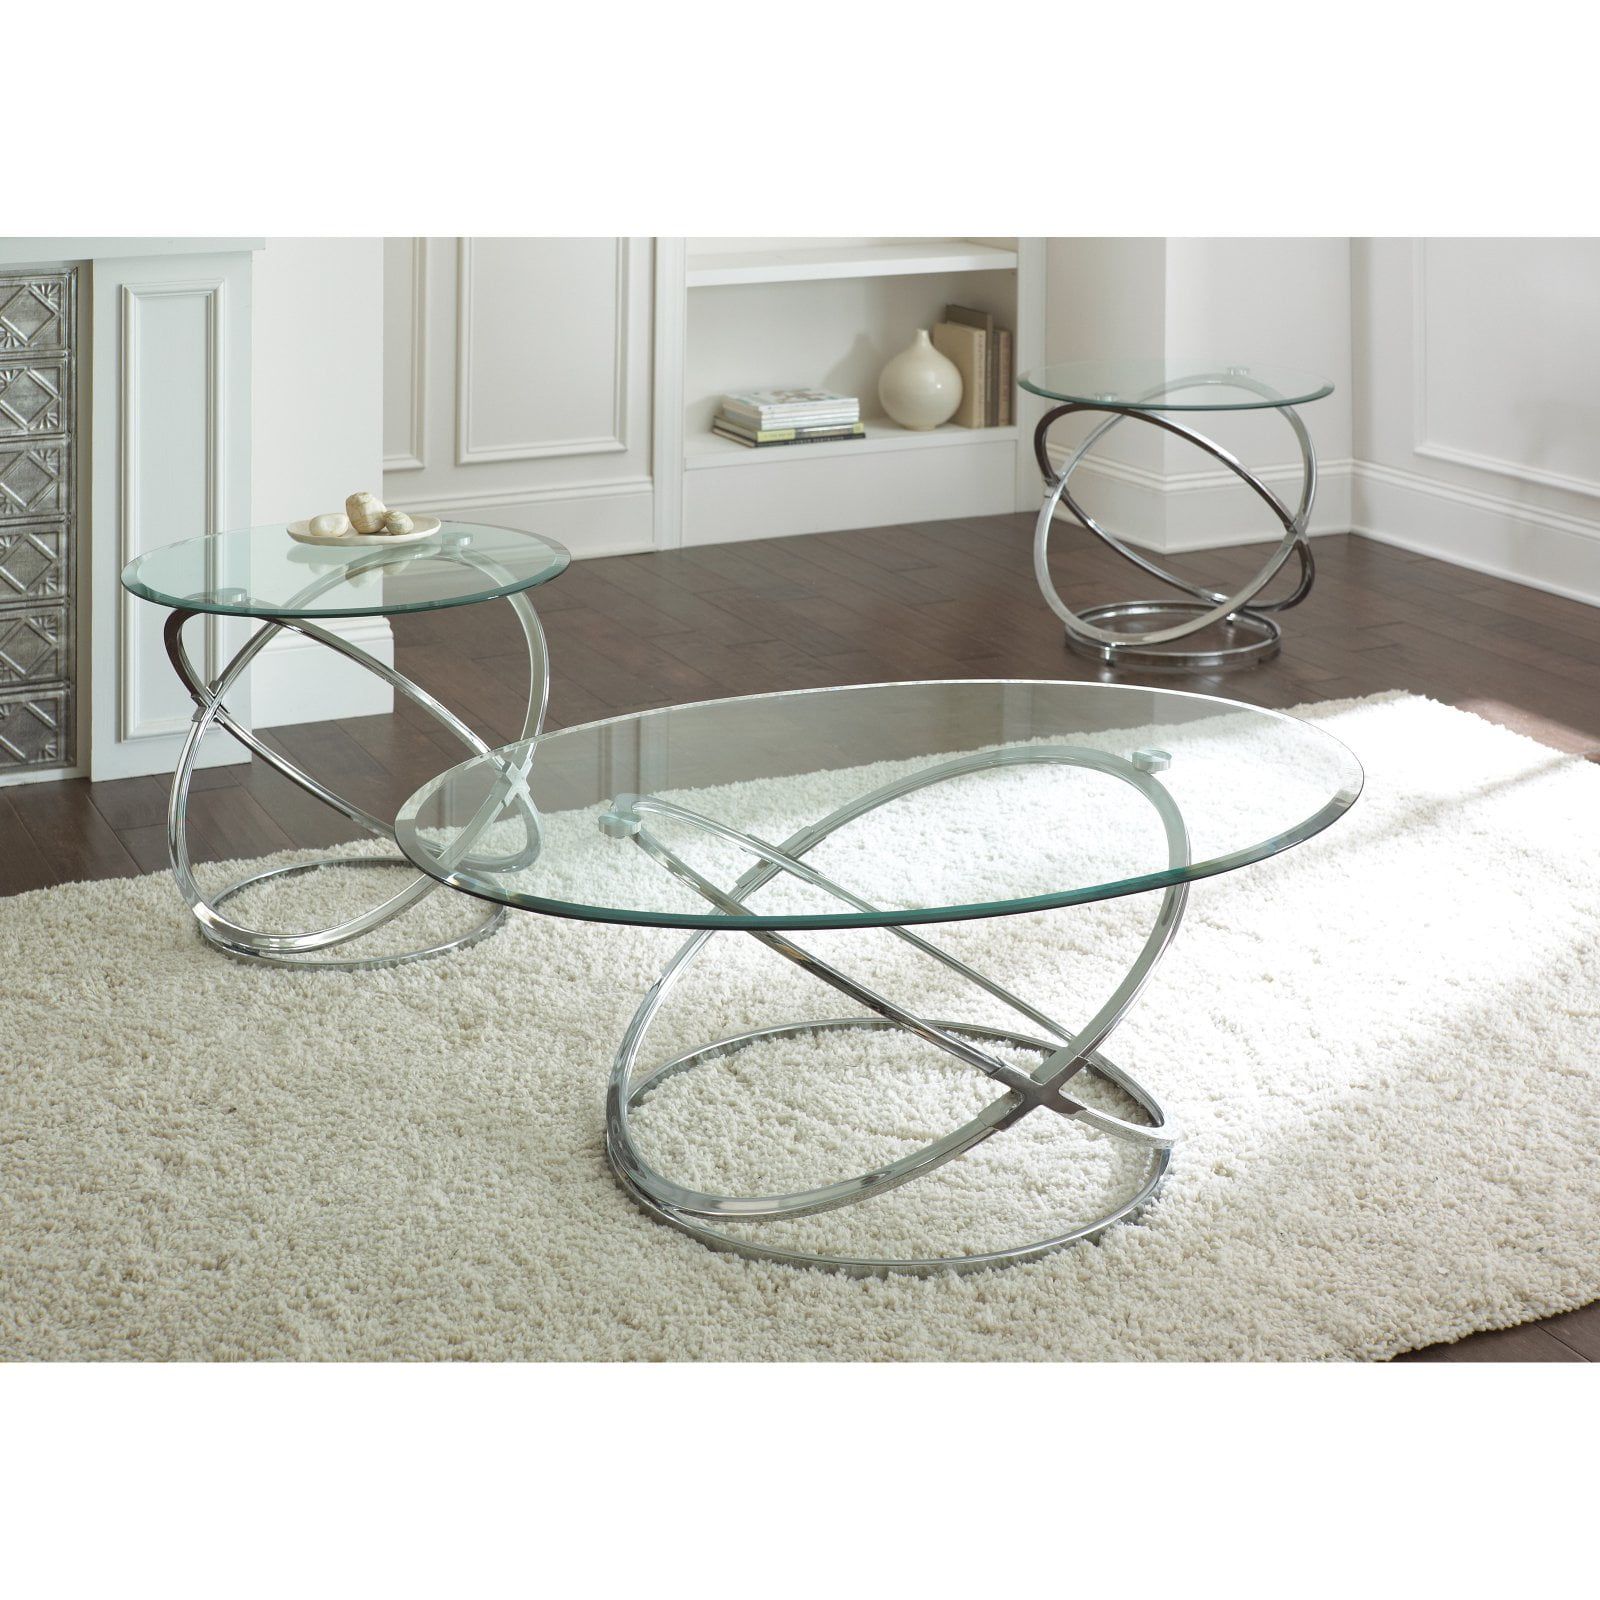 Steve Silver Orion Oval Chrome And Glass Coffee Table Set – Walmart Inside Oval Glass Coffee Tables (Gallery 15 of 20)